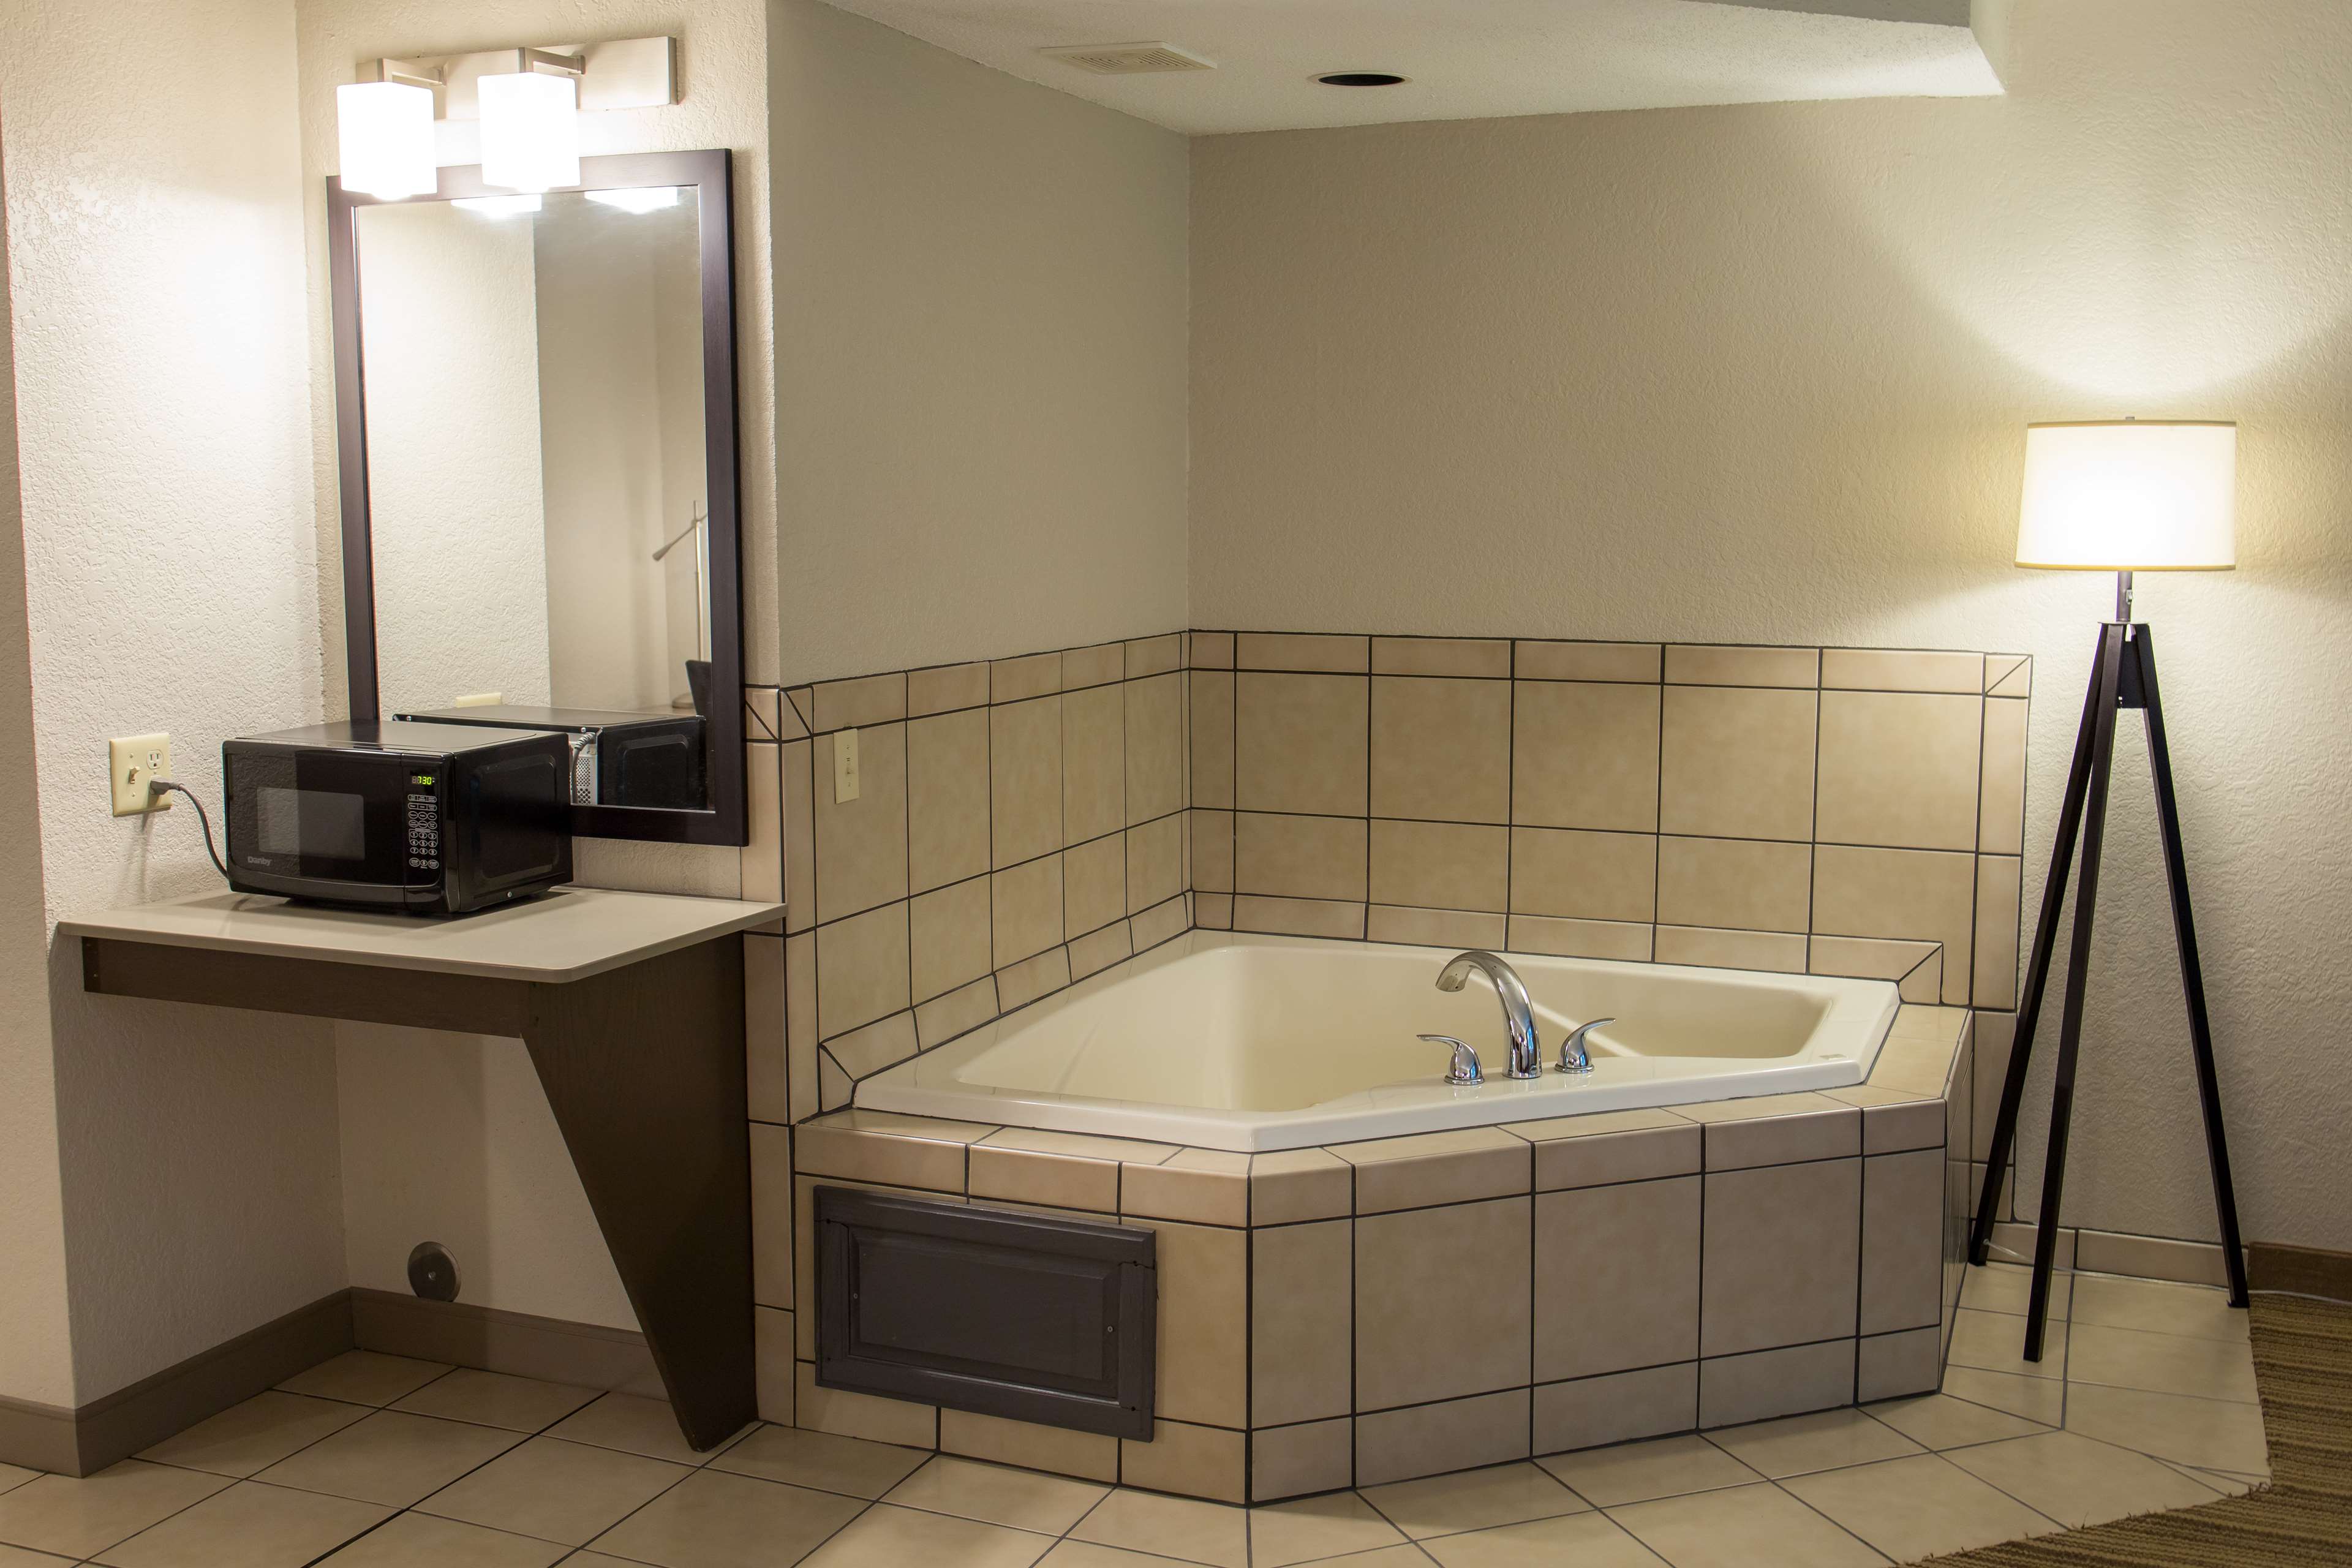 Country Inn & Suites by Radisson, Platteville, WI Photo